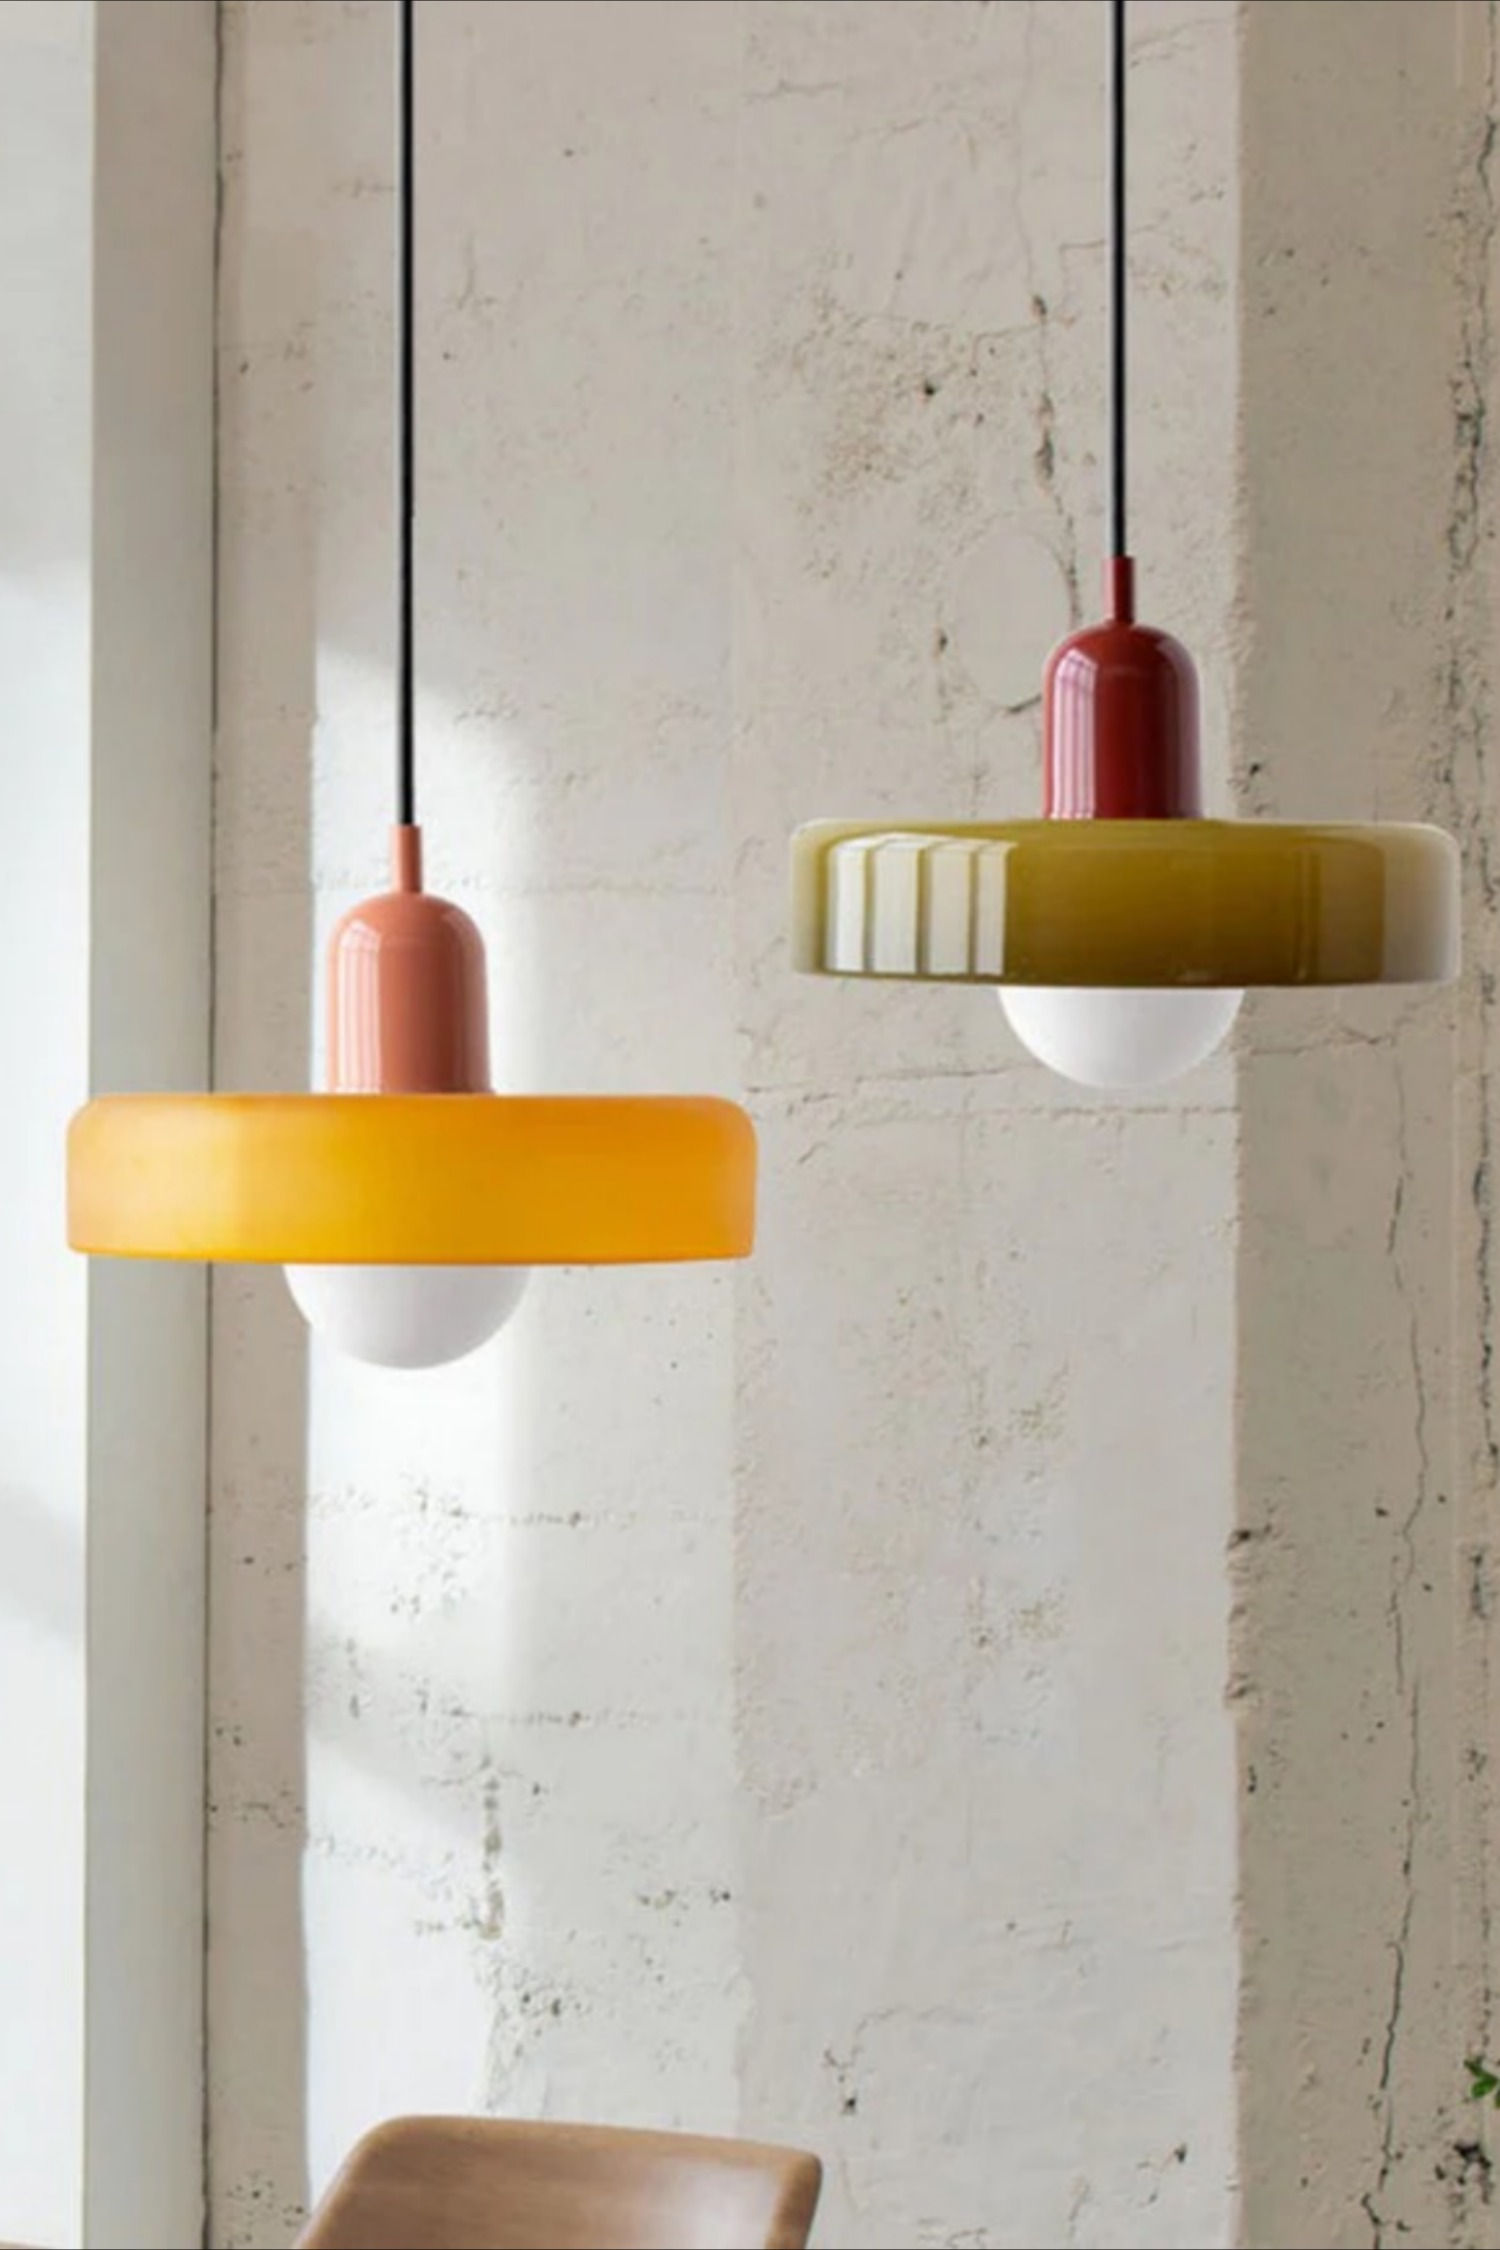 Kitchen Pendant Lights for Sufficient Brightness on Your island